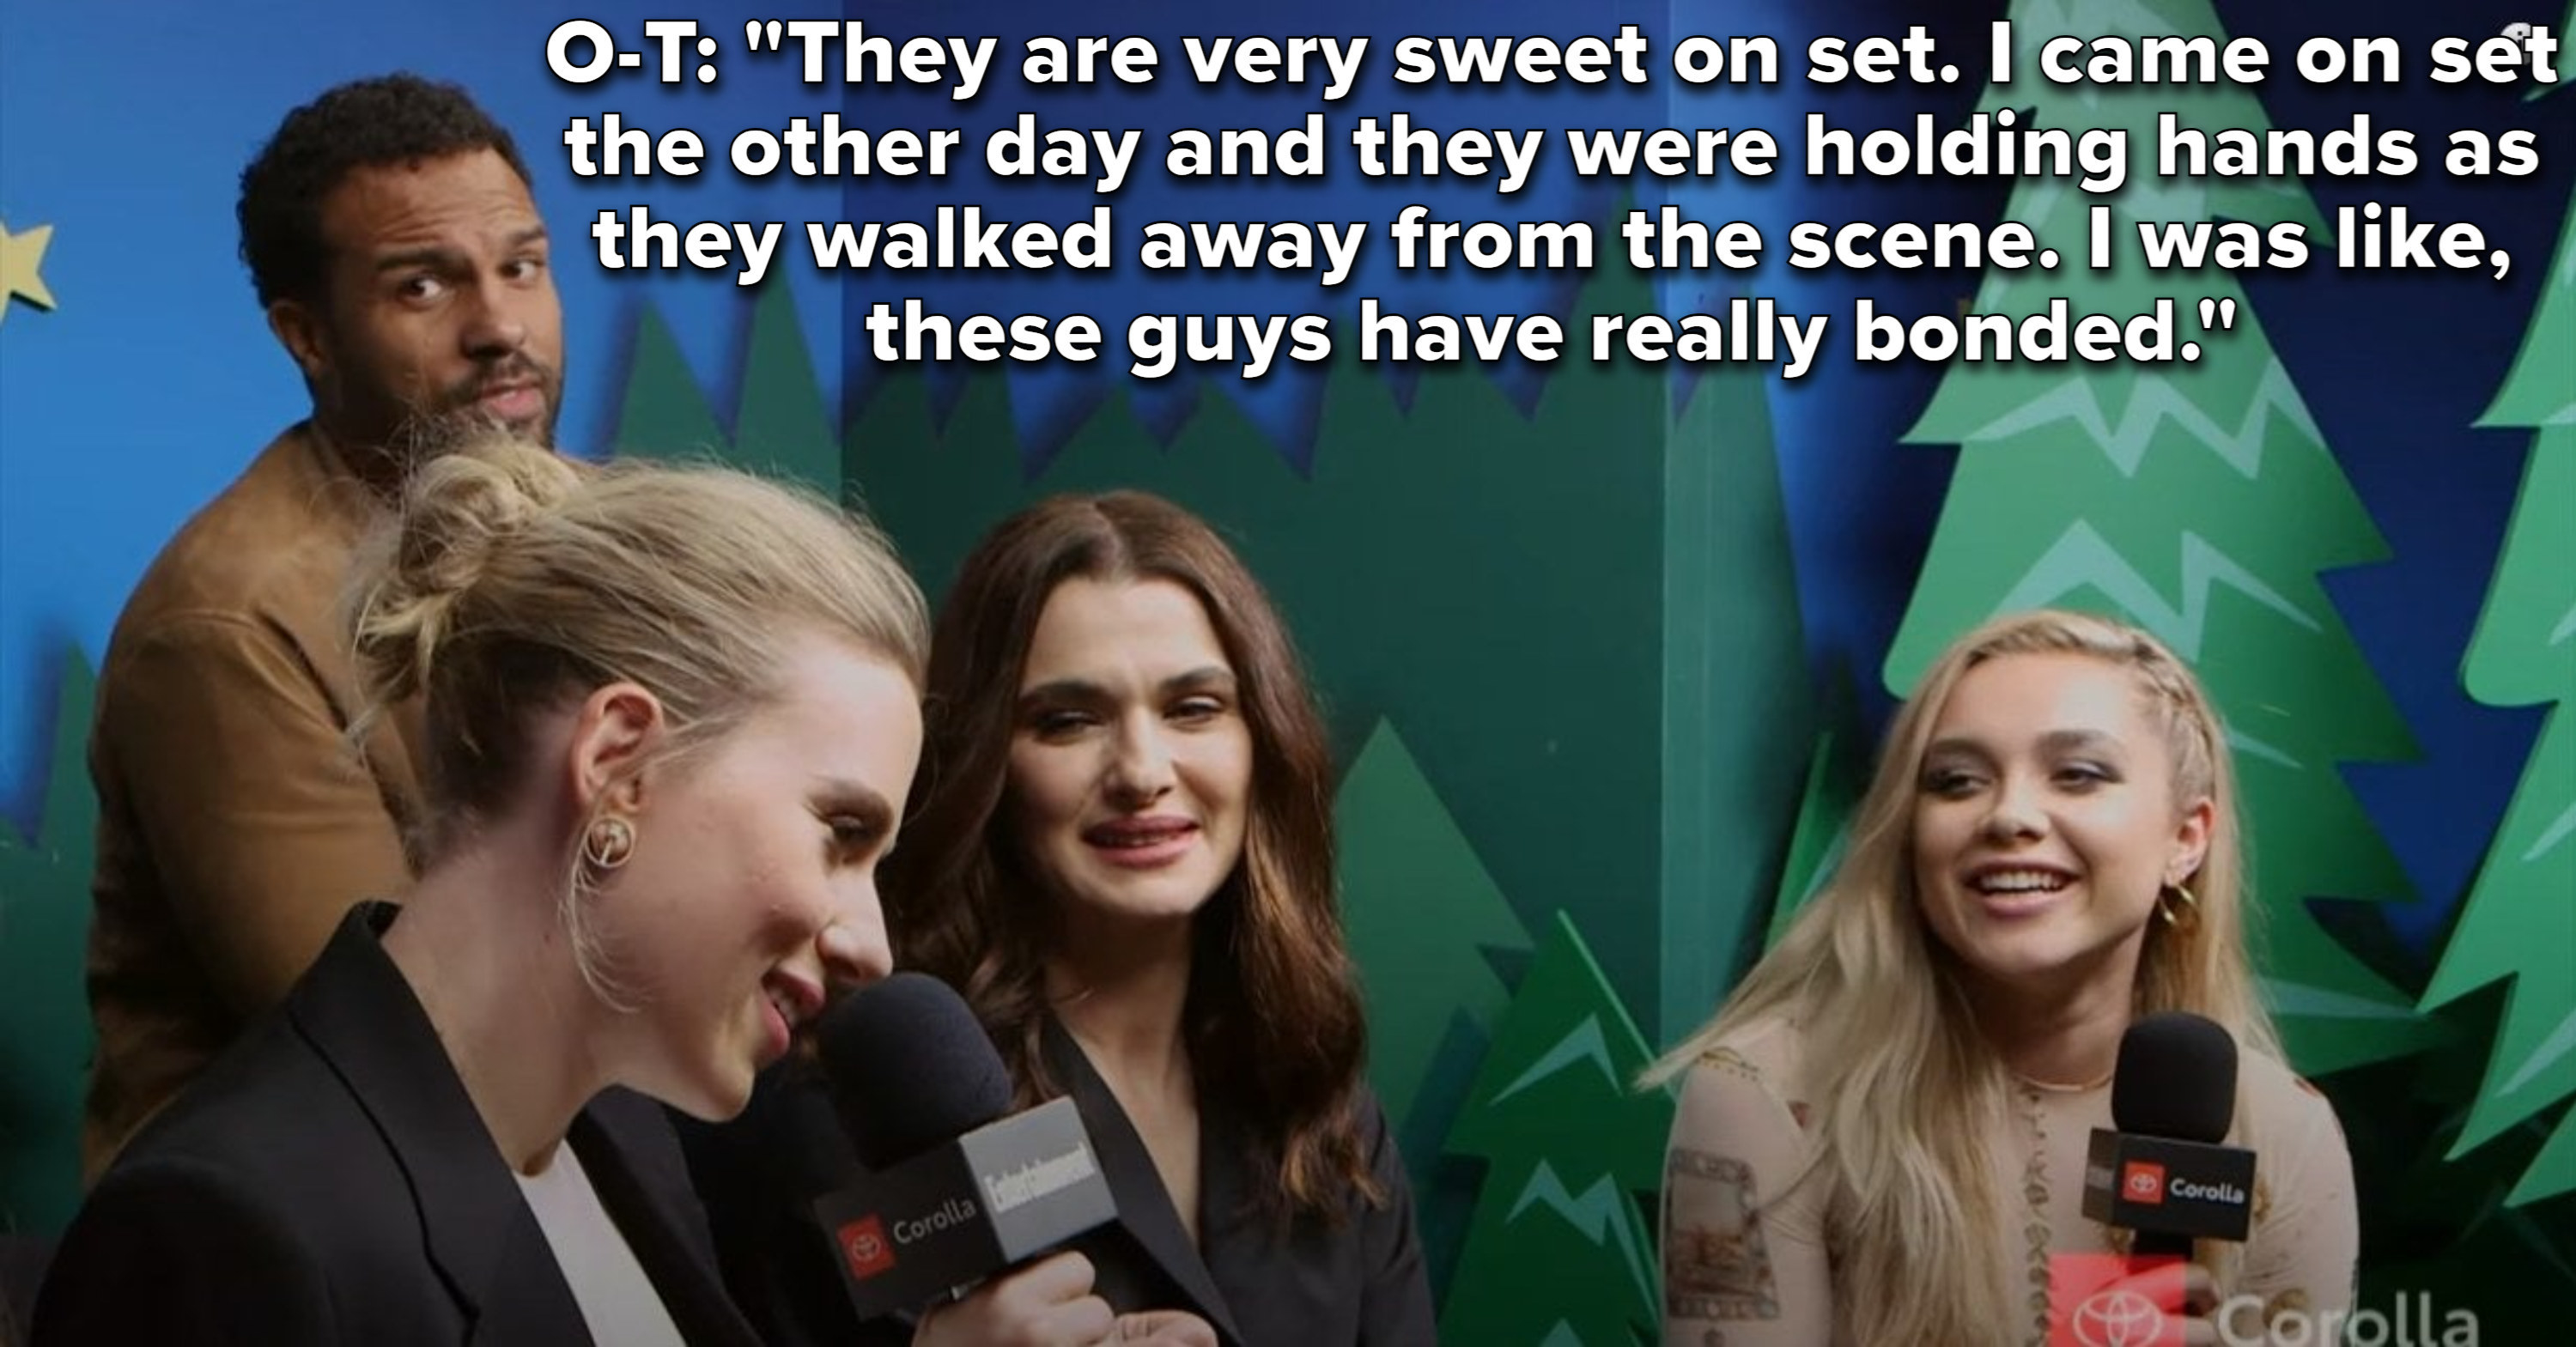 &quot;They are very sweet on set. I came on set the other day and they were holding hands as they walked away from the scene. I was like, these guys have really bonded&quot;